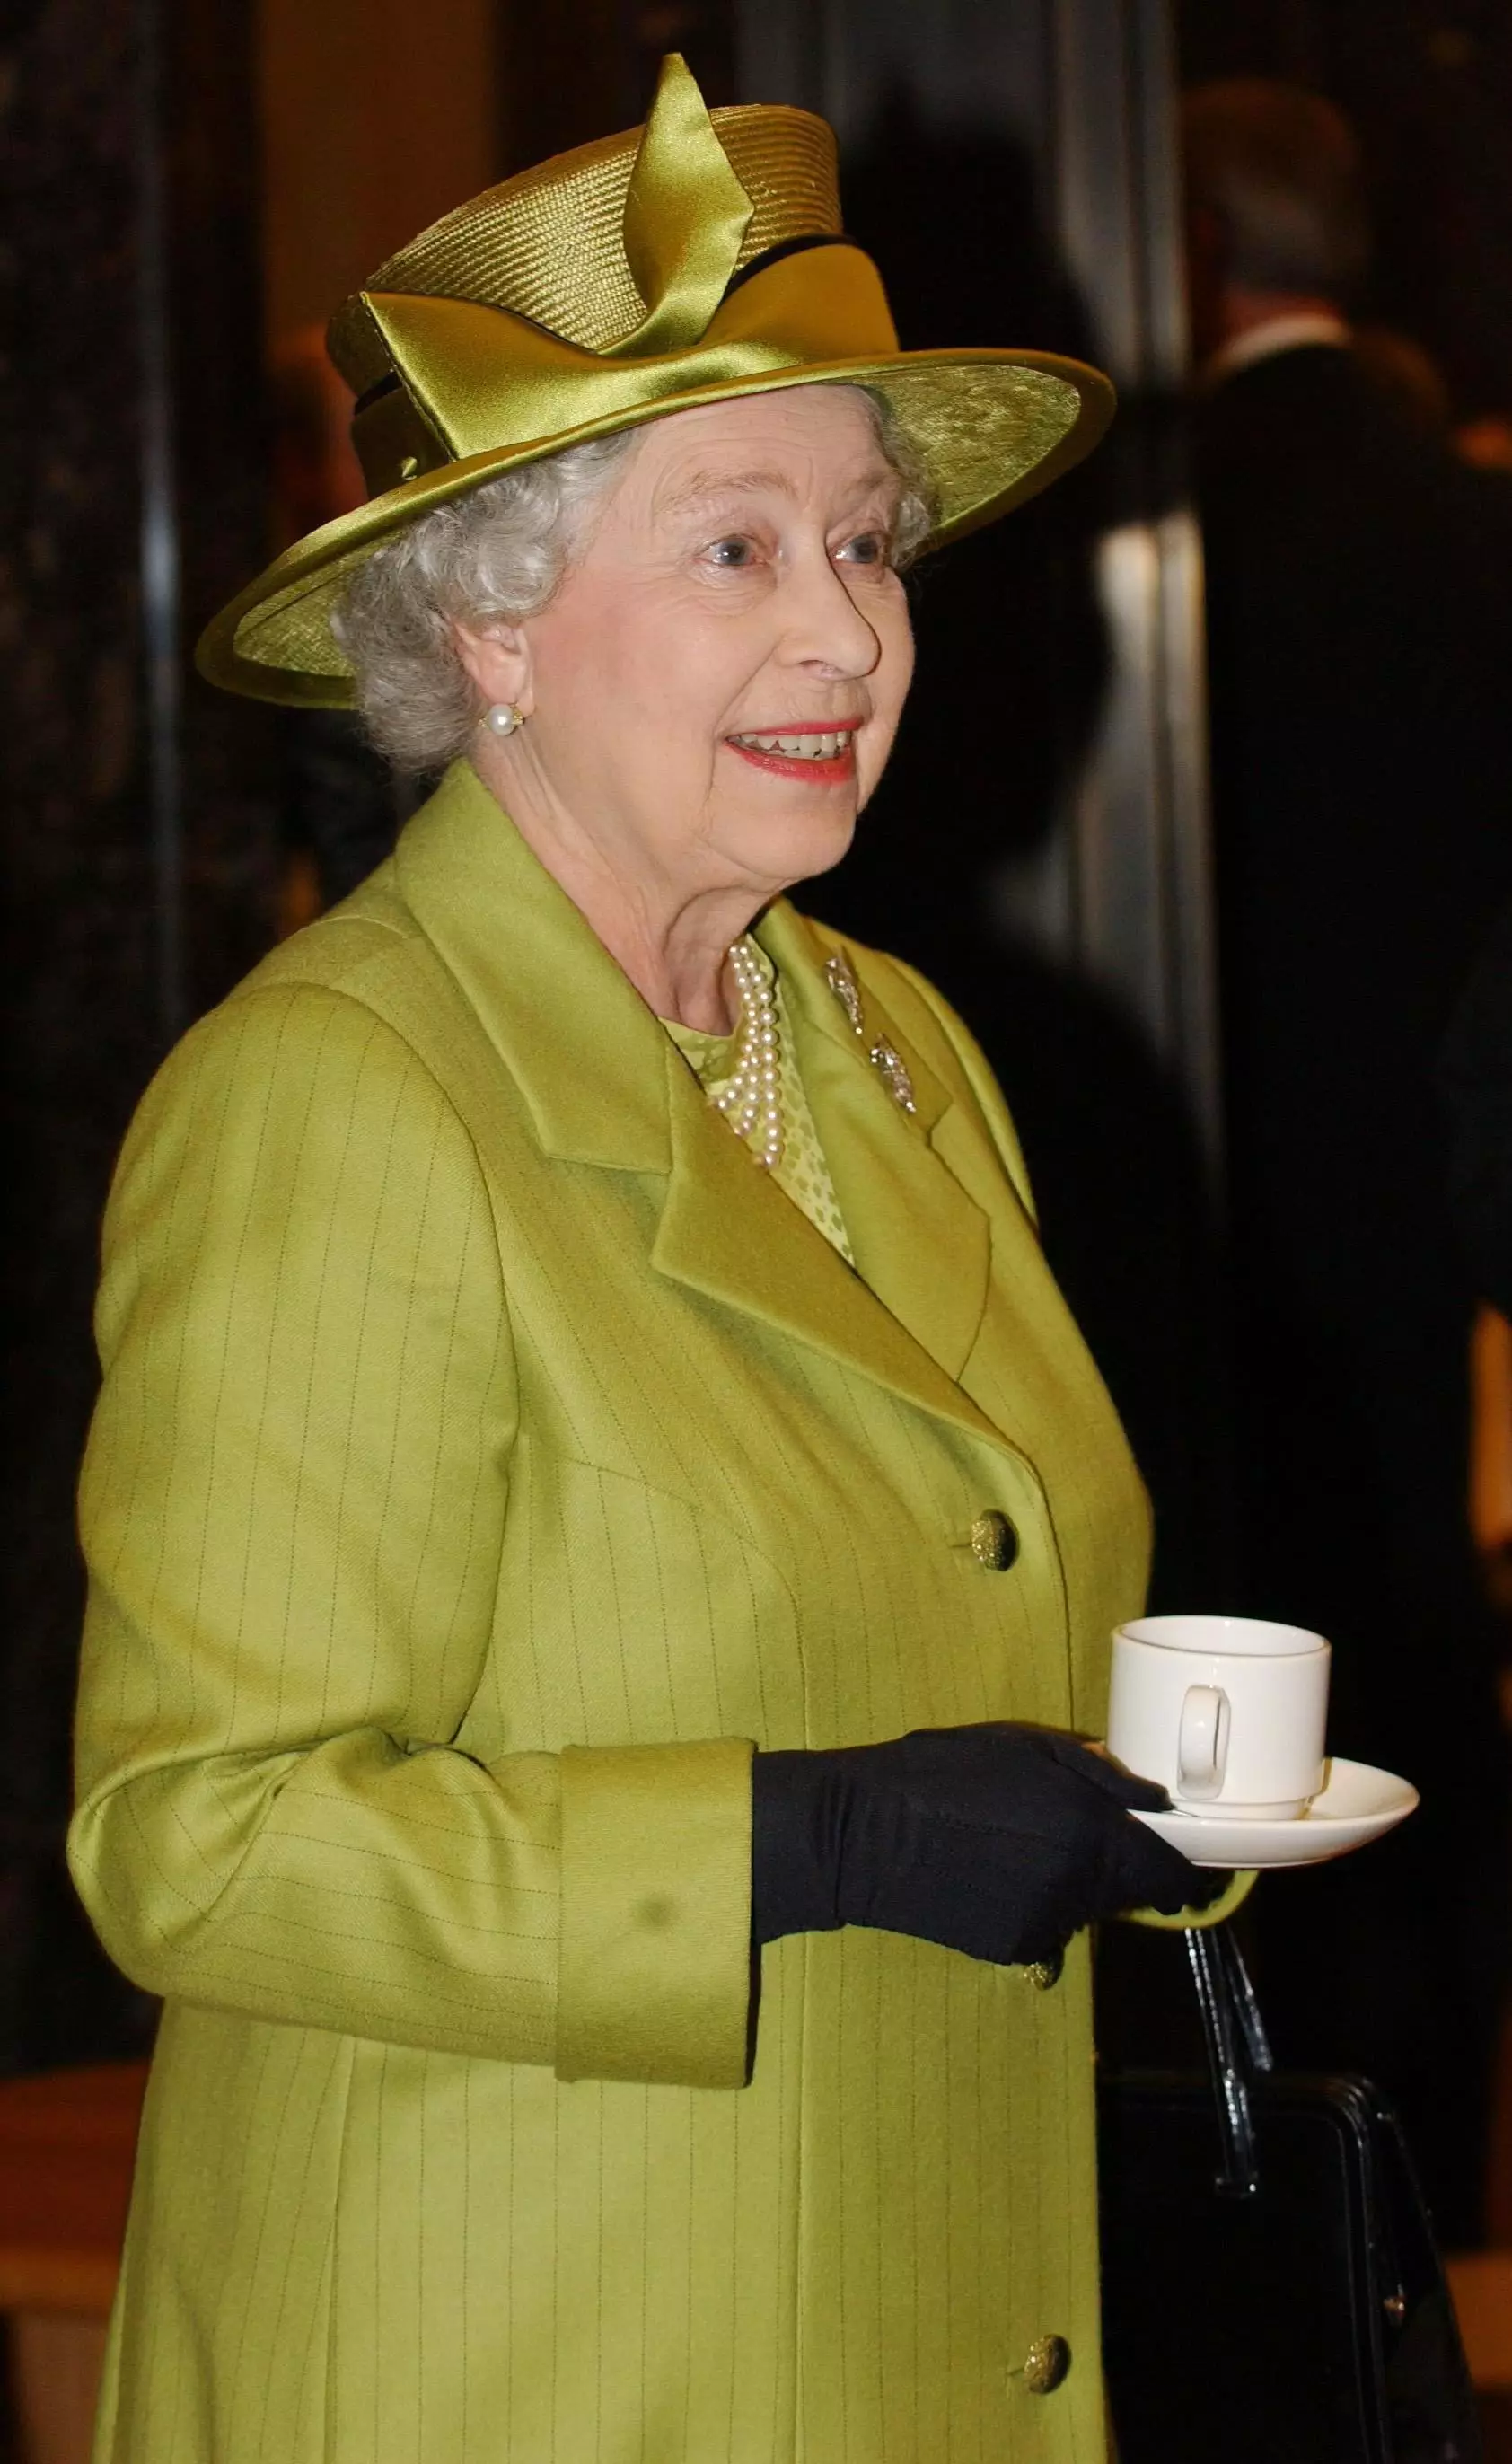 Royal tea suppliers Twinings were first 'honoured' by Queen Victoria (